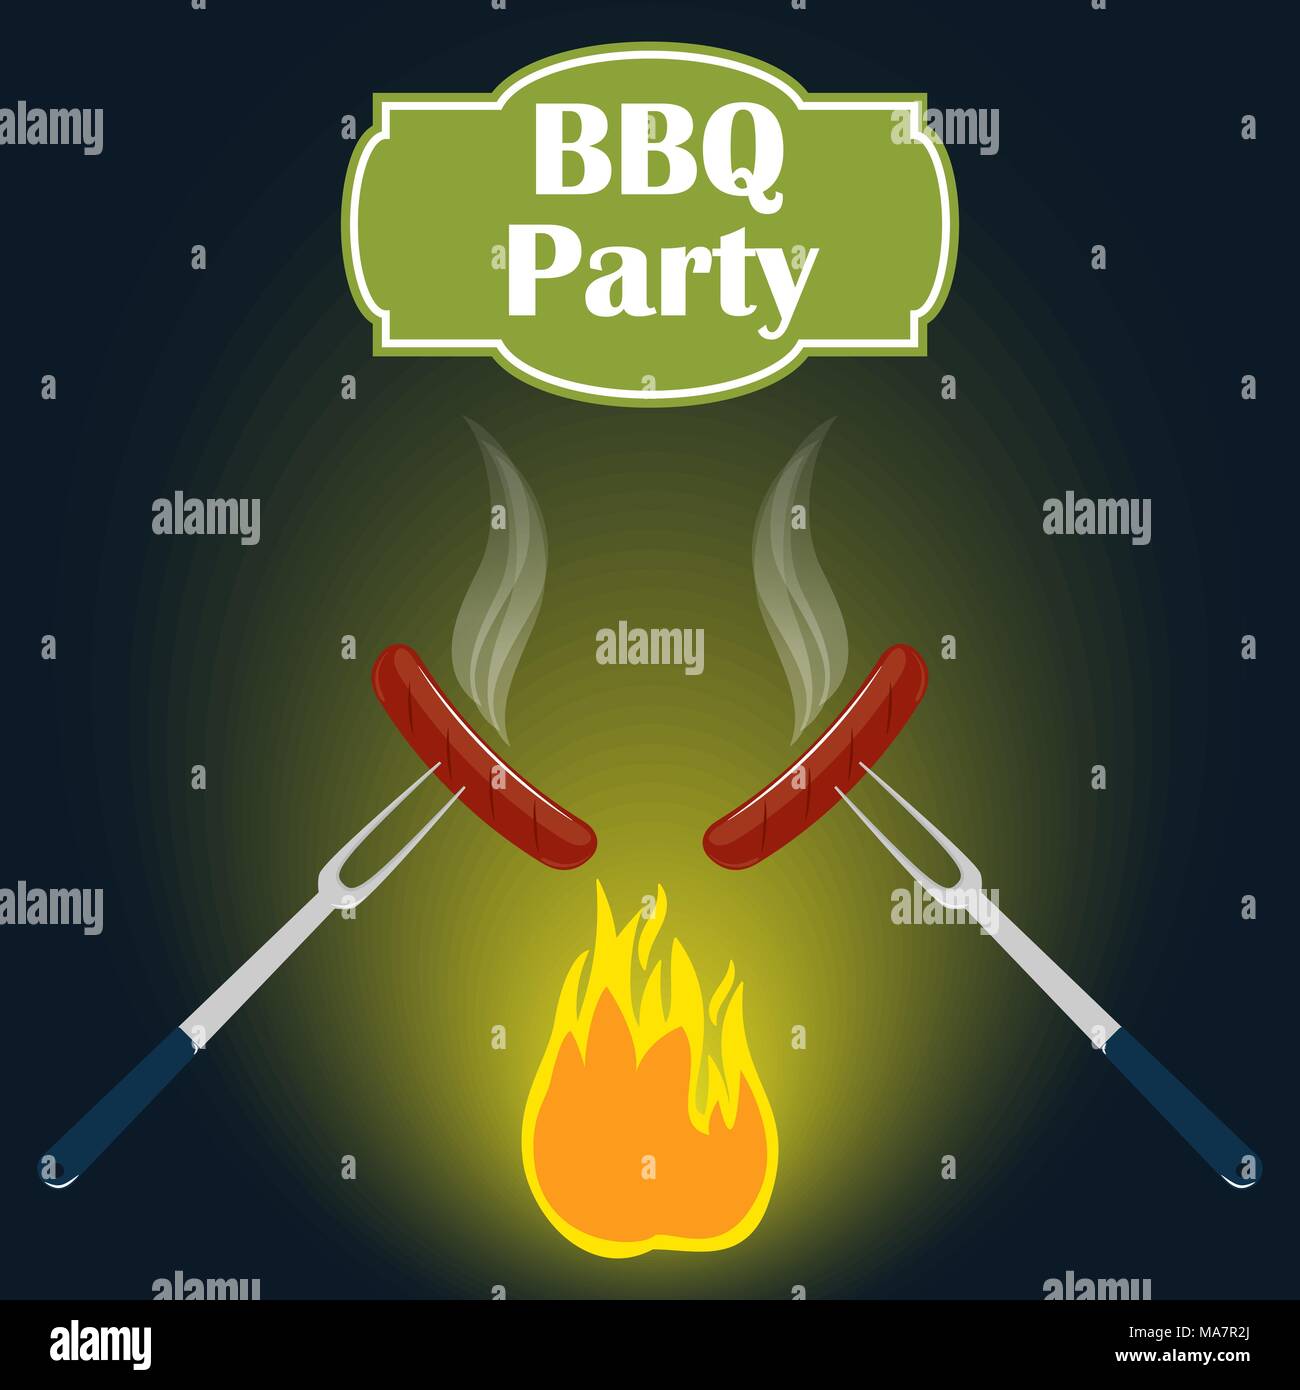 Barbecue party invitation card design template. Fire, sausage, fork. Vector illustration, flat style Stock Vector